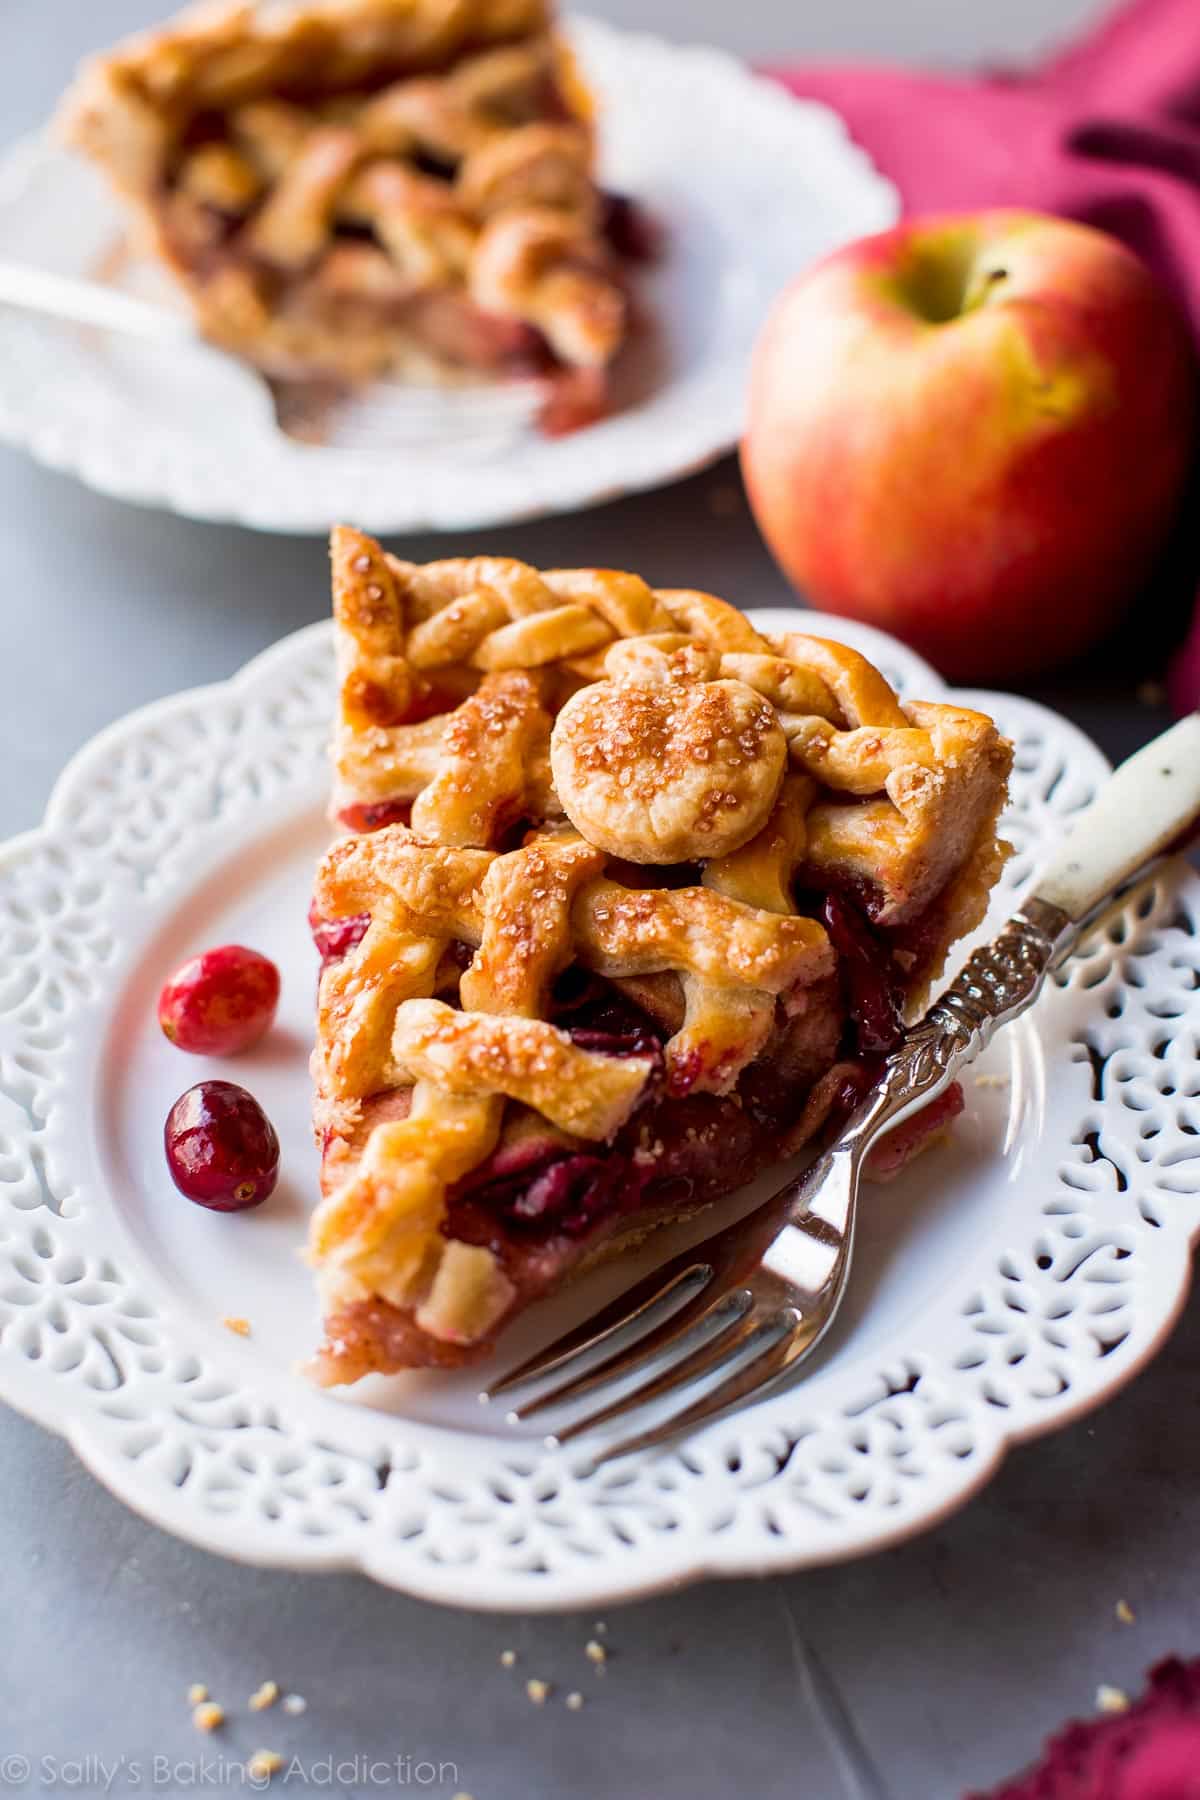 Sweet cinnamon apples and tart cranberries come together in this incredible Thanksgiving pie! Recipe on sallysbakingaddiction.com